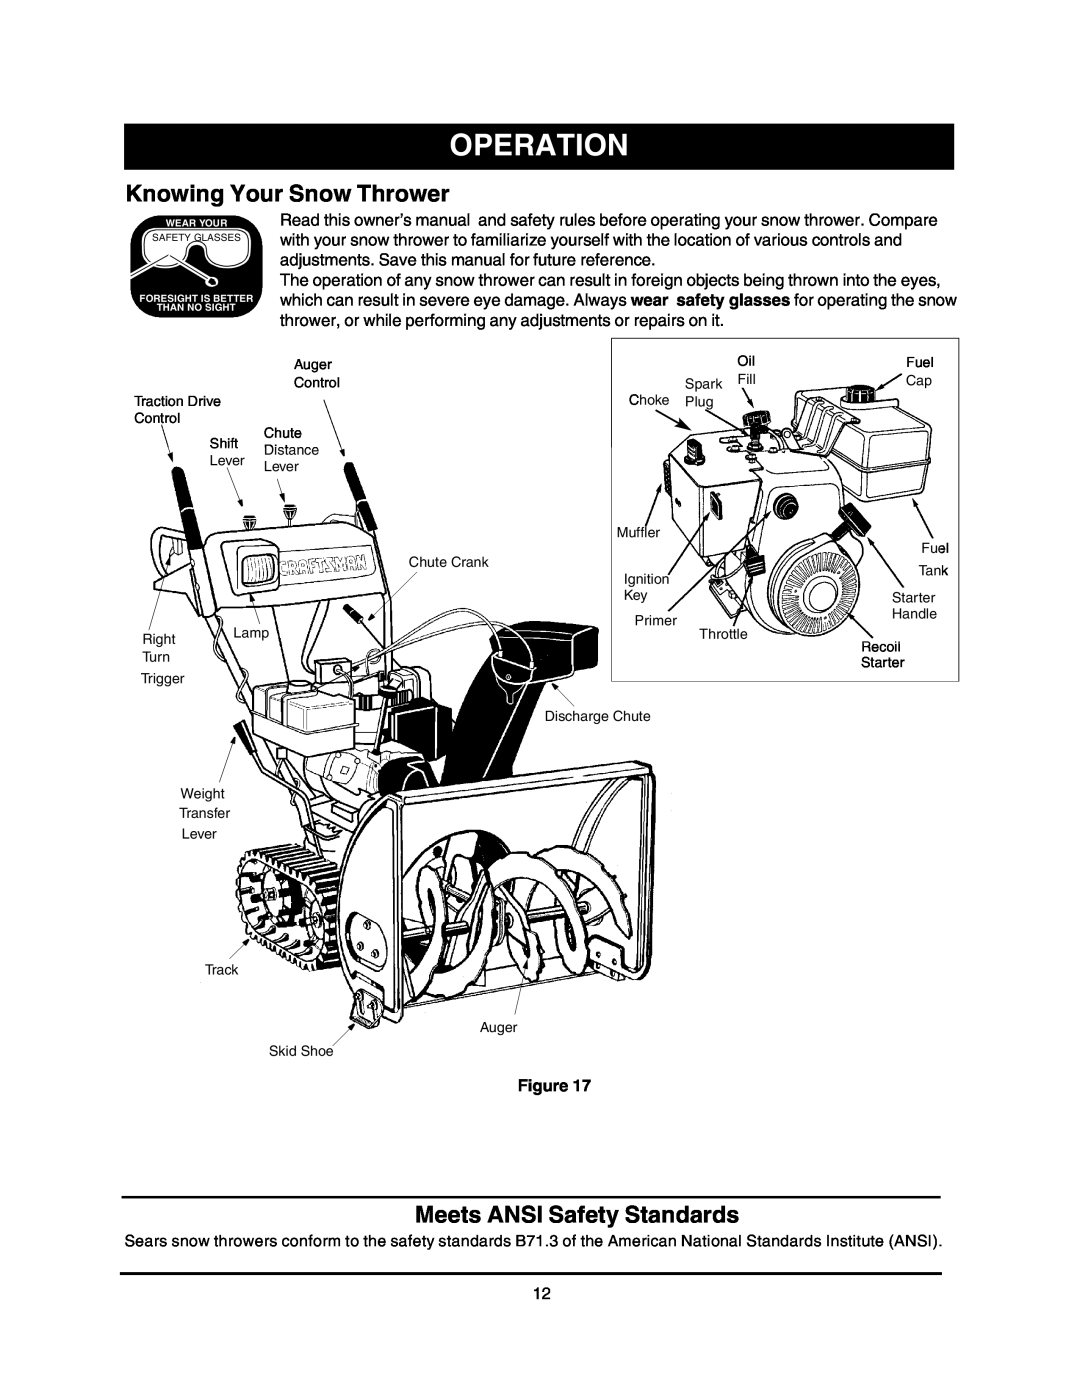 Craftsman 247.88855 owner manual Operation, Knowing Your Snow Thrower, Meets ANSI Safety Standards 